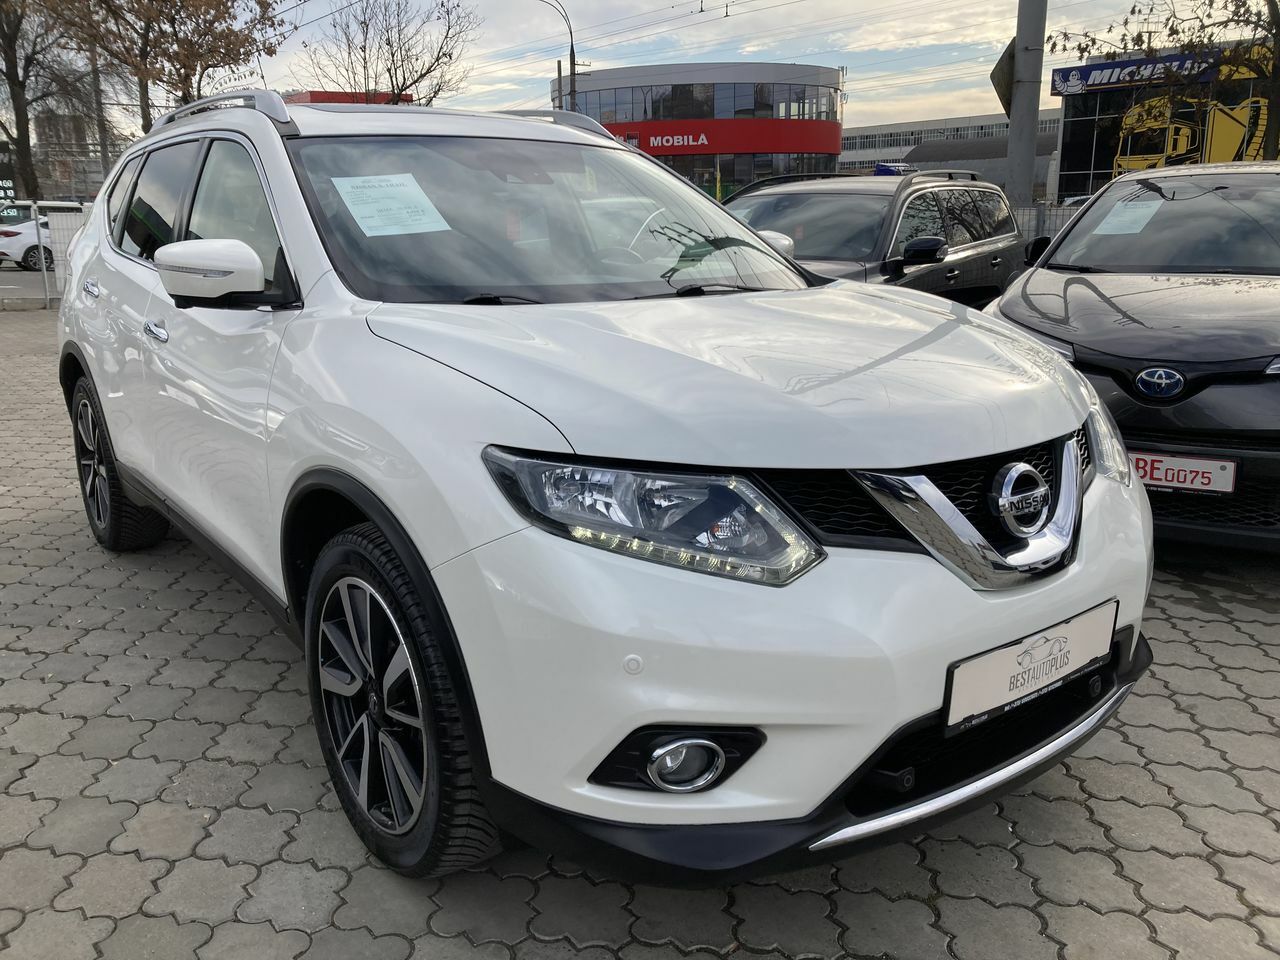 <span style="font-weight: bold;">Nissan x-trail</span>